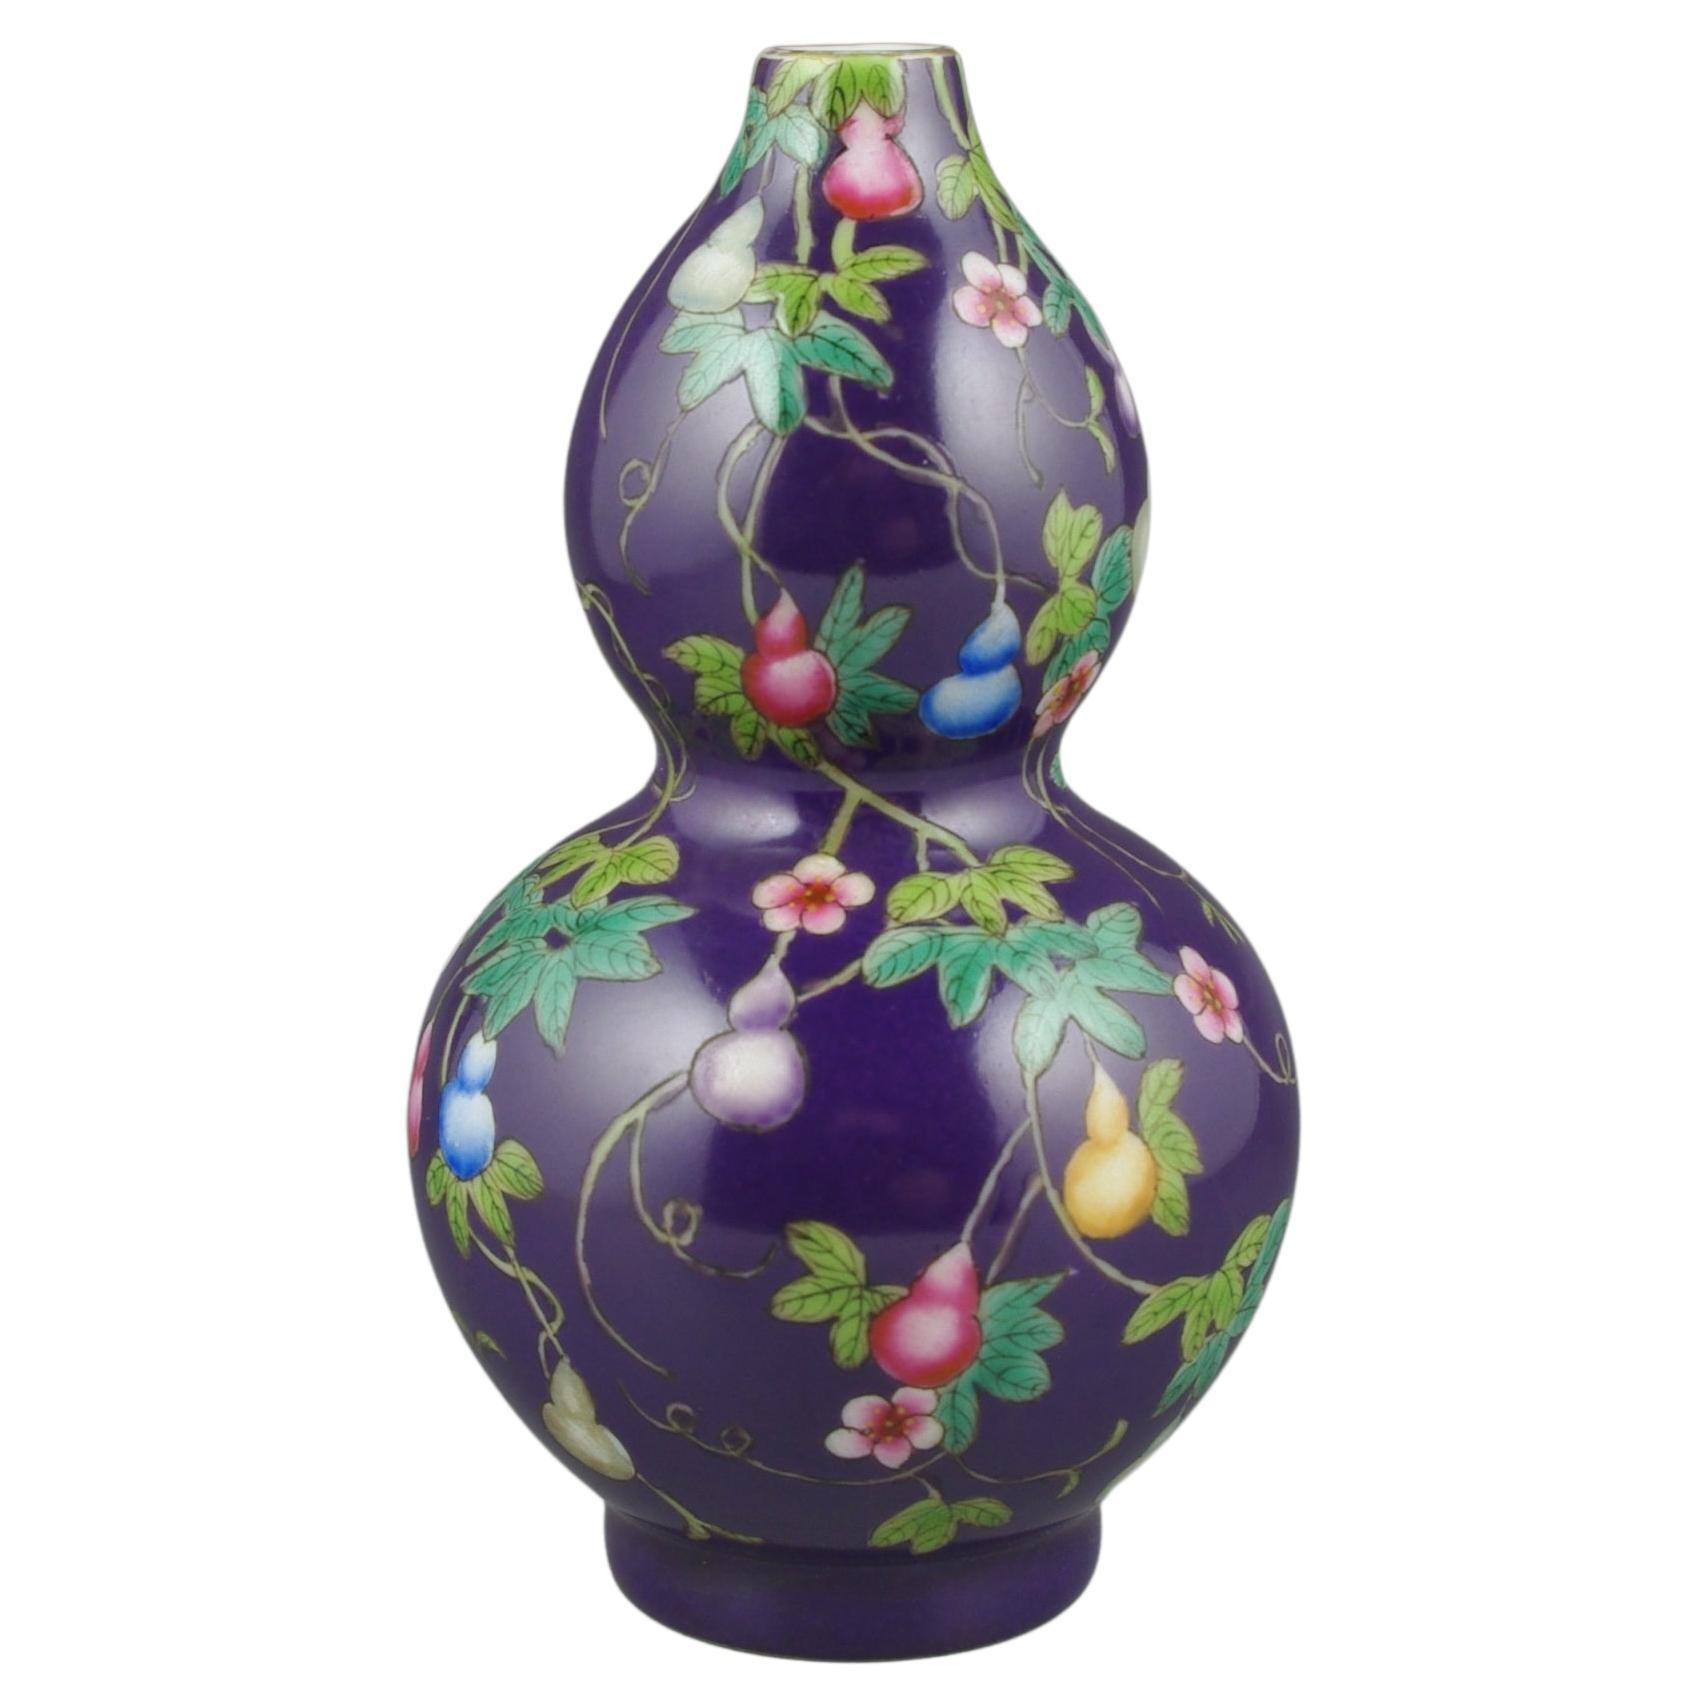 We are delighted to present this elegant Chinese porcelain vase, a splendid representation of the rich and diverse tradition of Chinese ceramic artistry. This piece, steeped in symbolism and crafted with meticulous attention to detail, stands as a